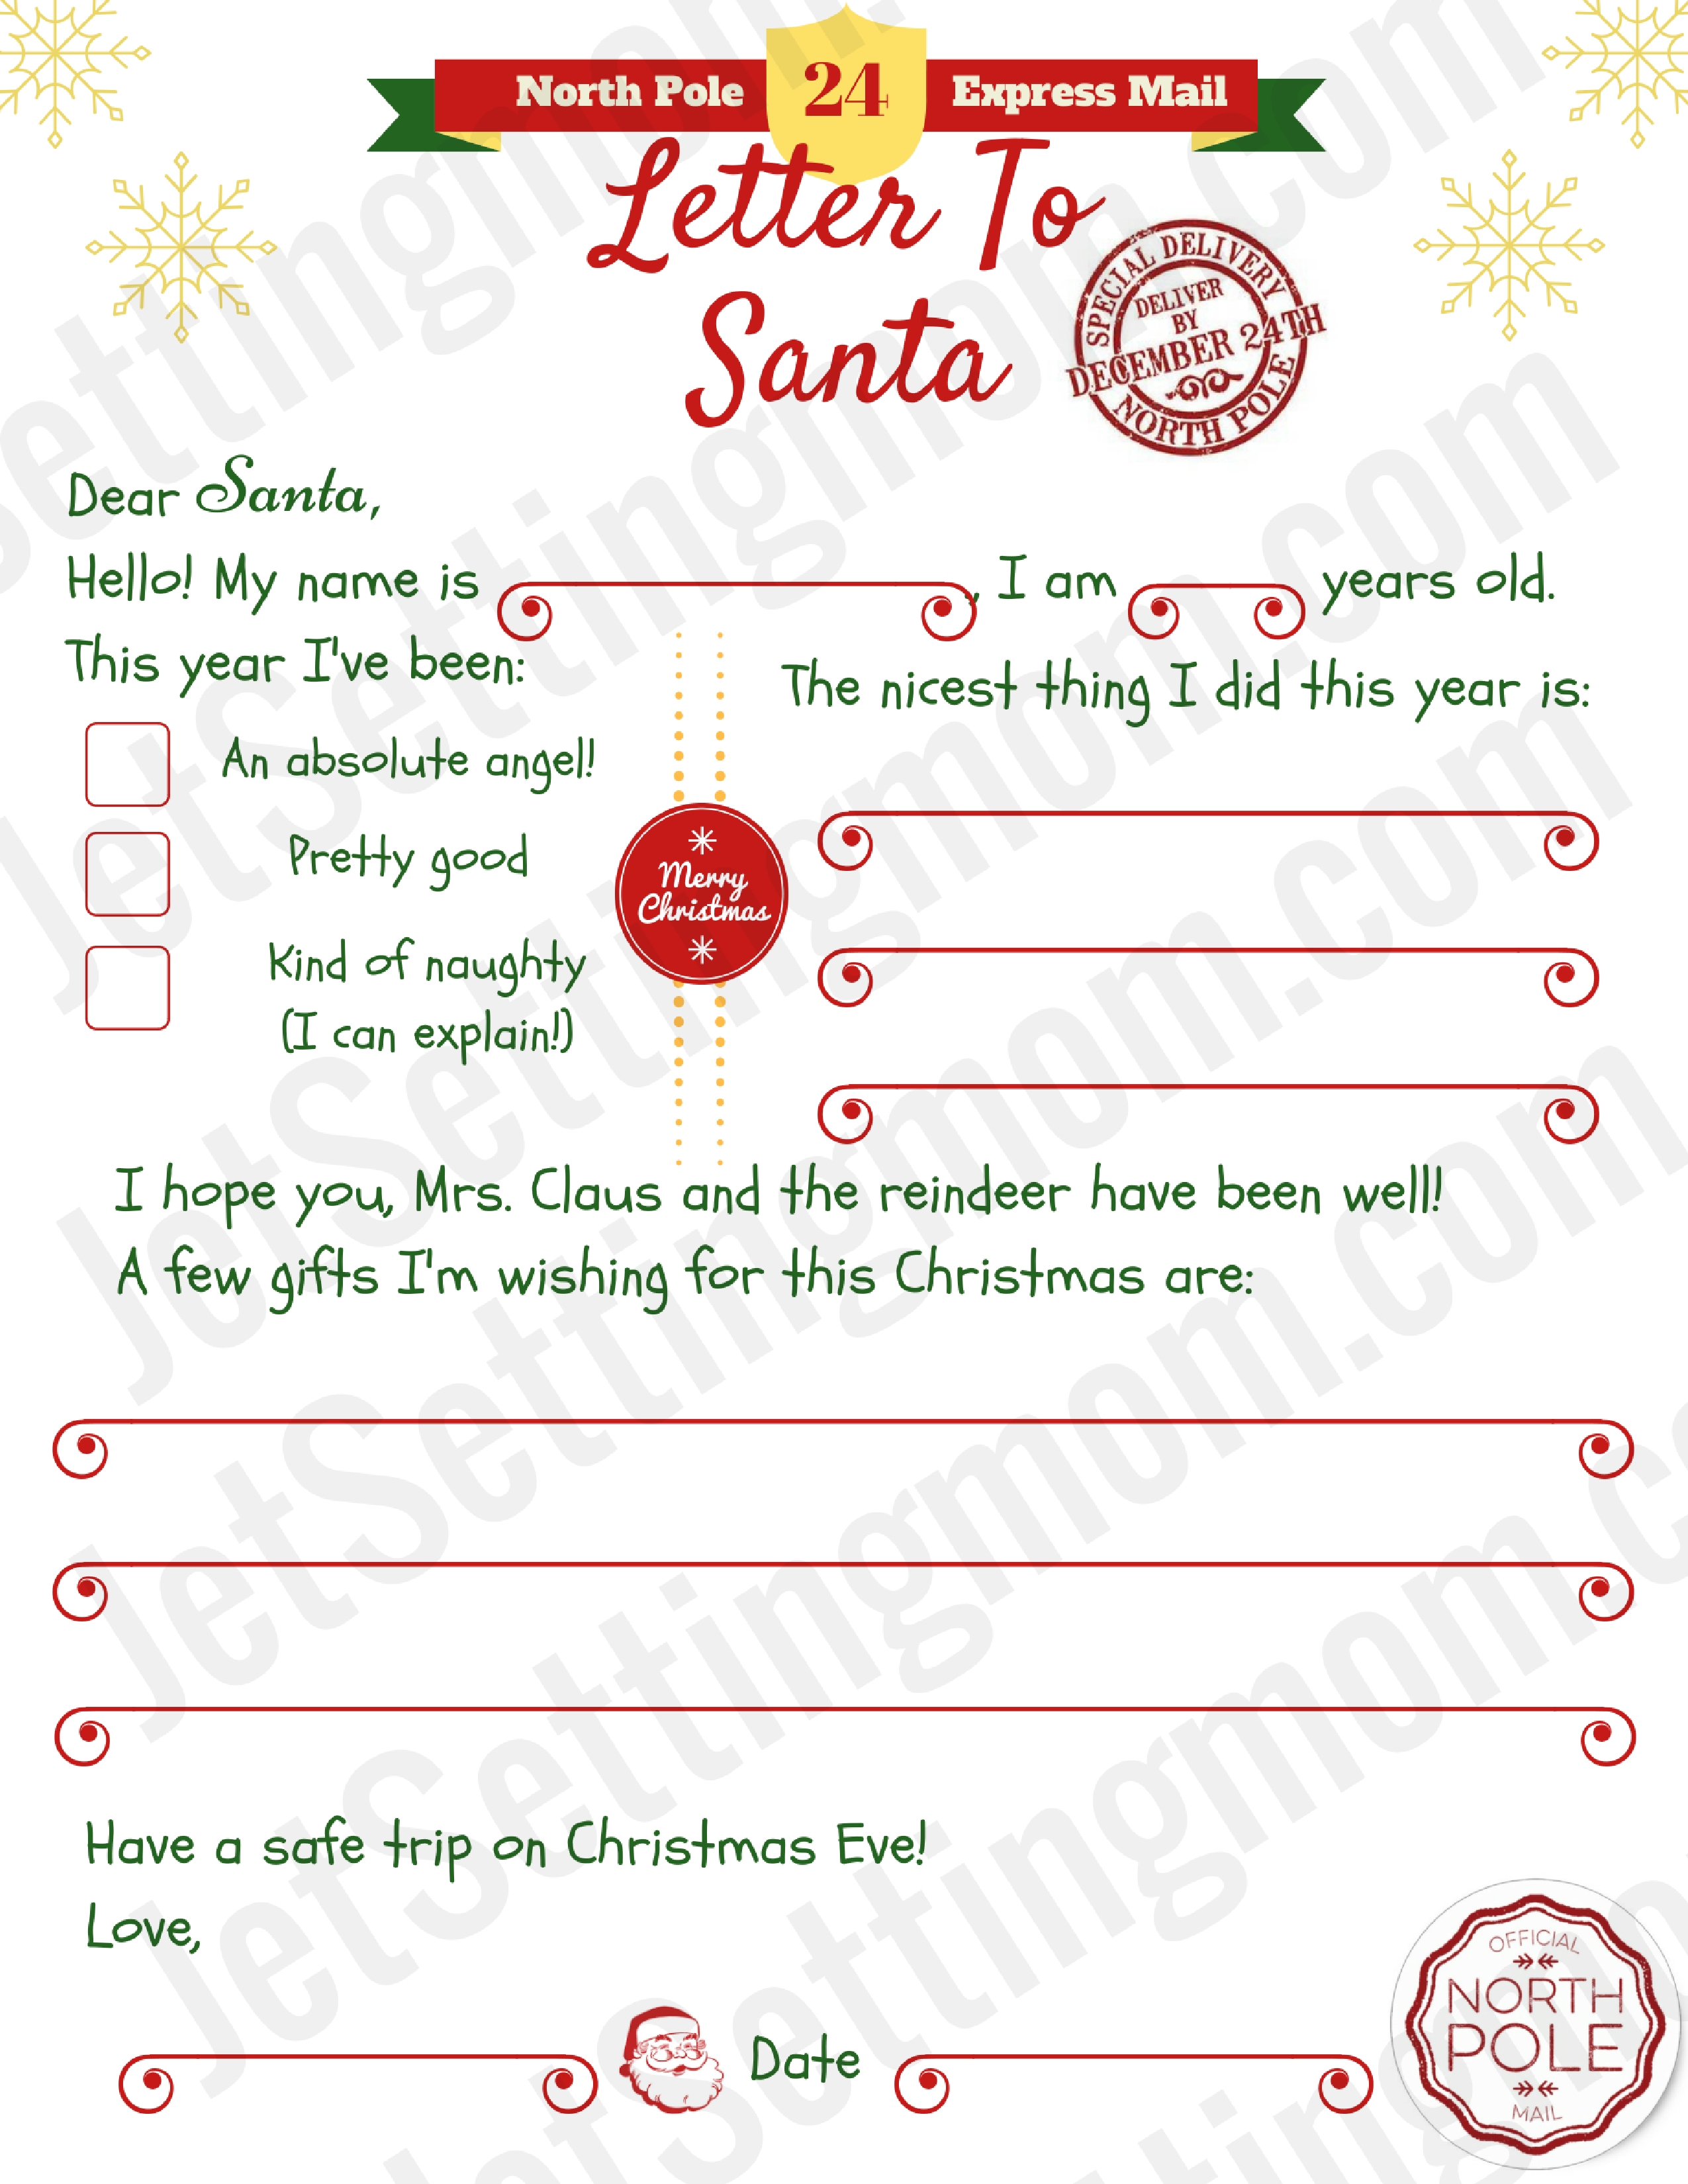 How To Write A Letter To Santa Claus Examples Of Resumes